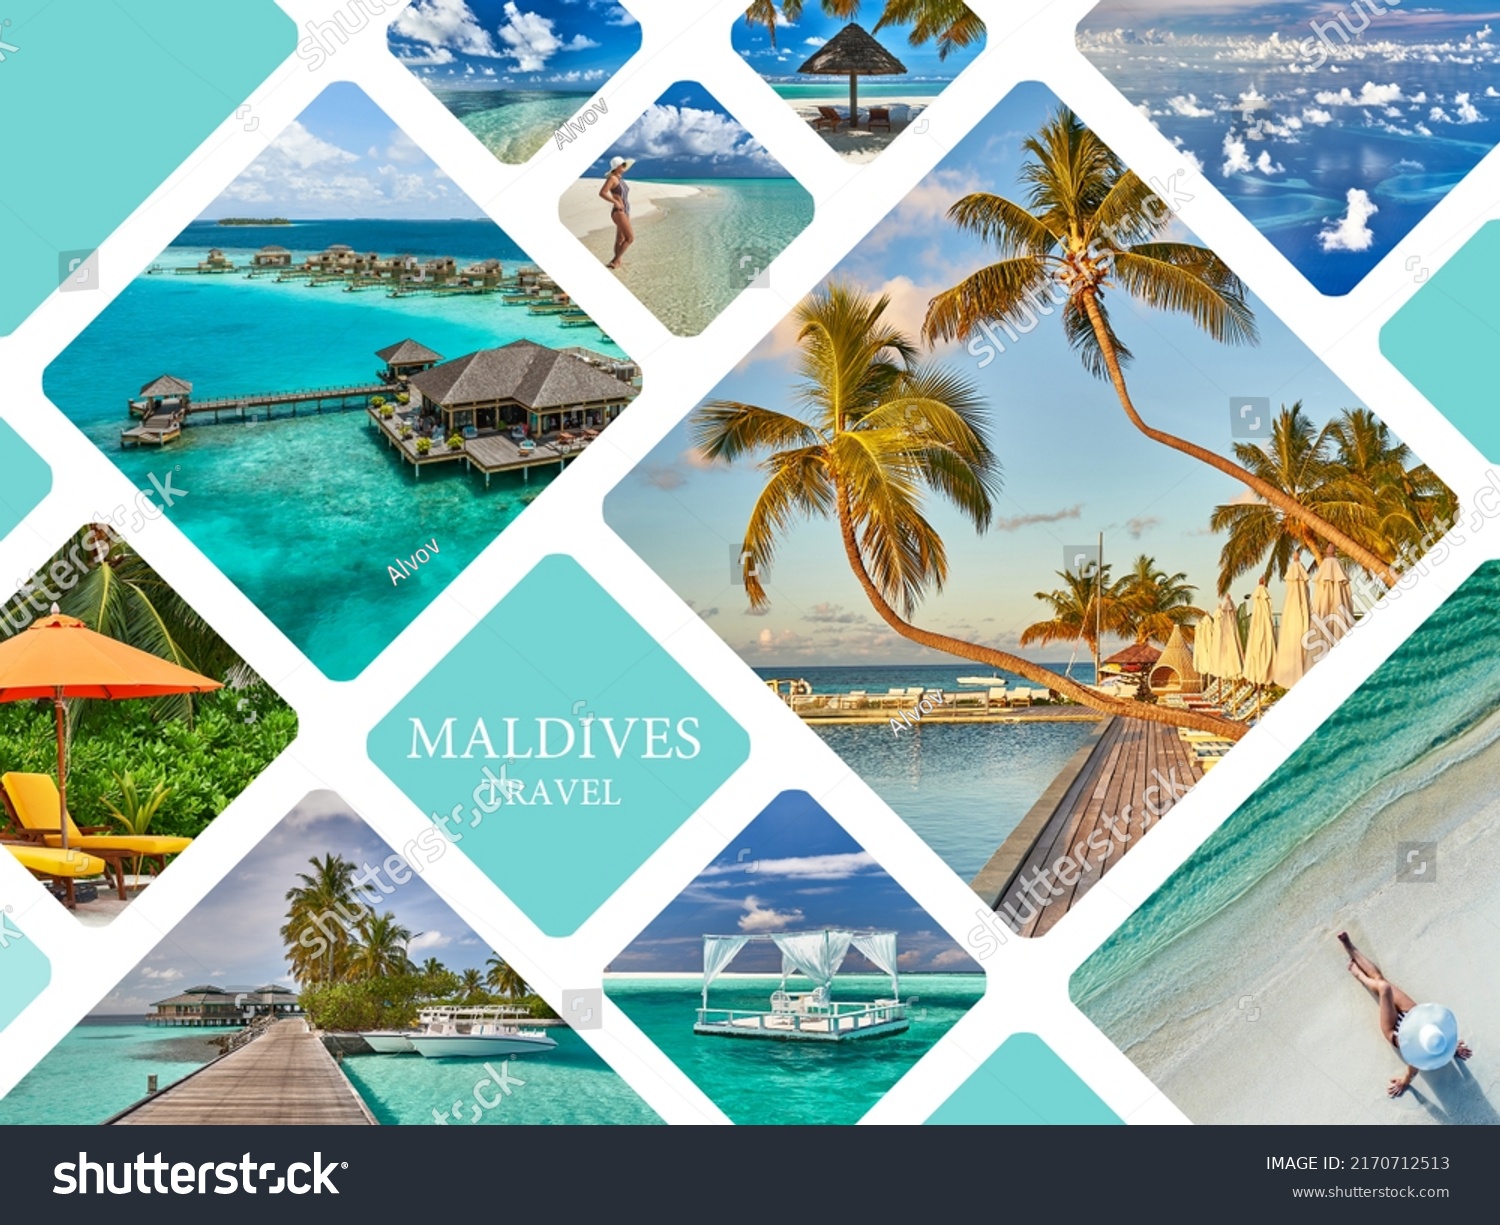 Travel concept photo collage. Tropical beach and water bungalows. Travel and tourism to luxury resorts in the Maldives islands #2170712513